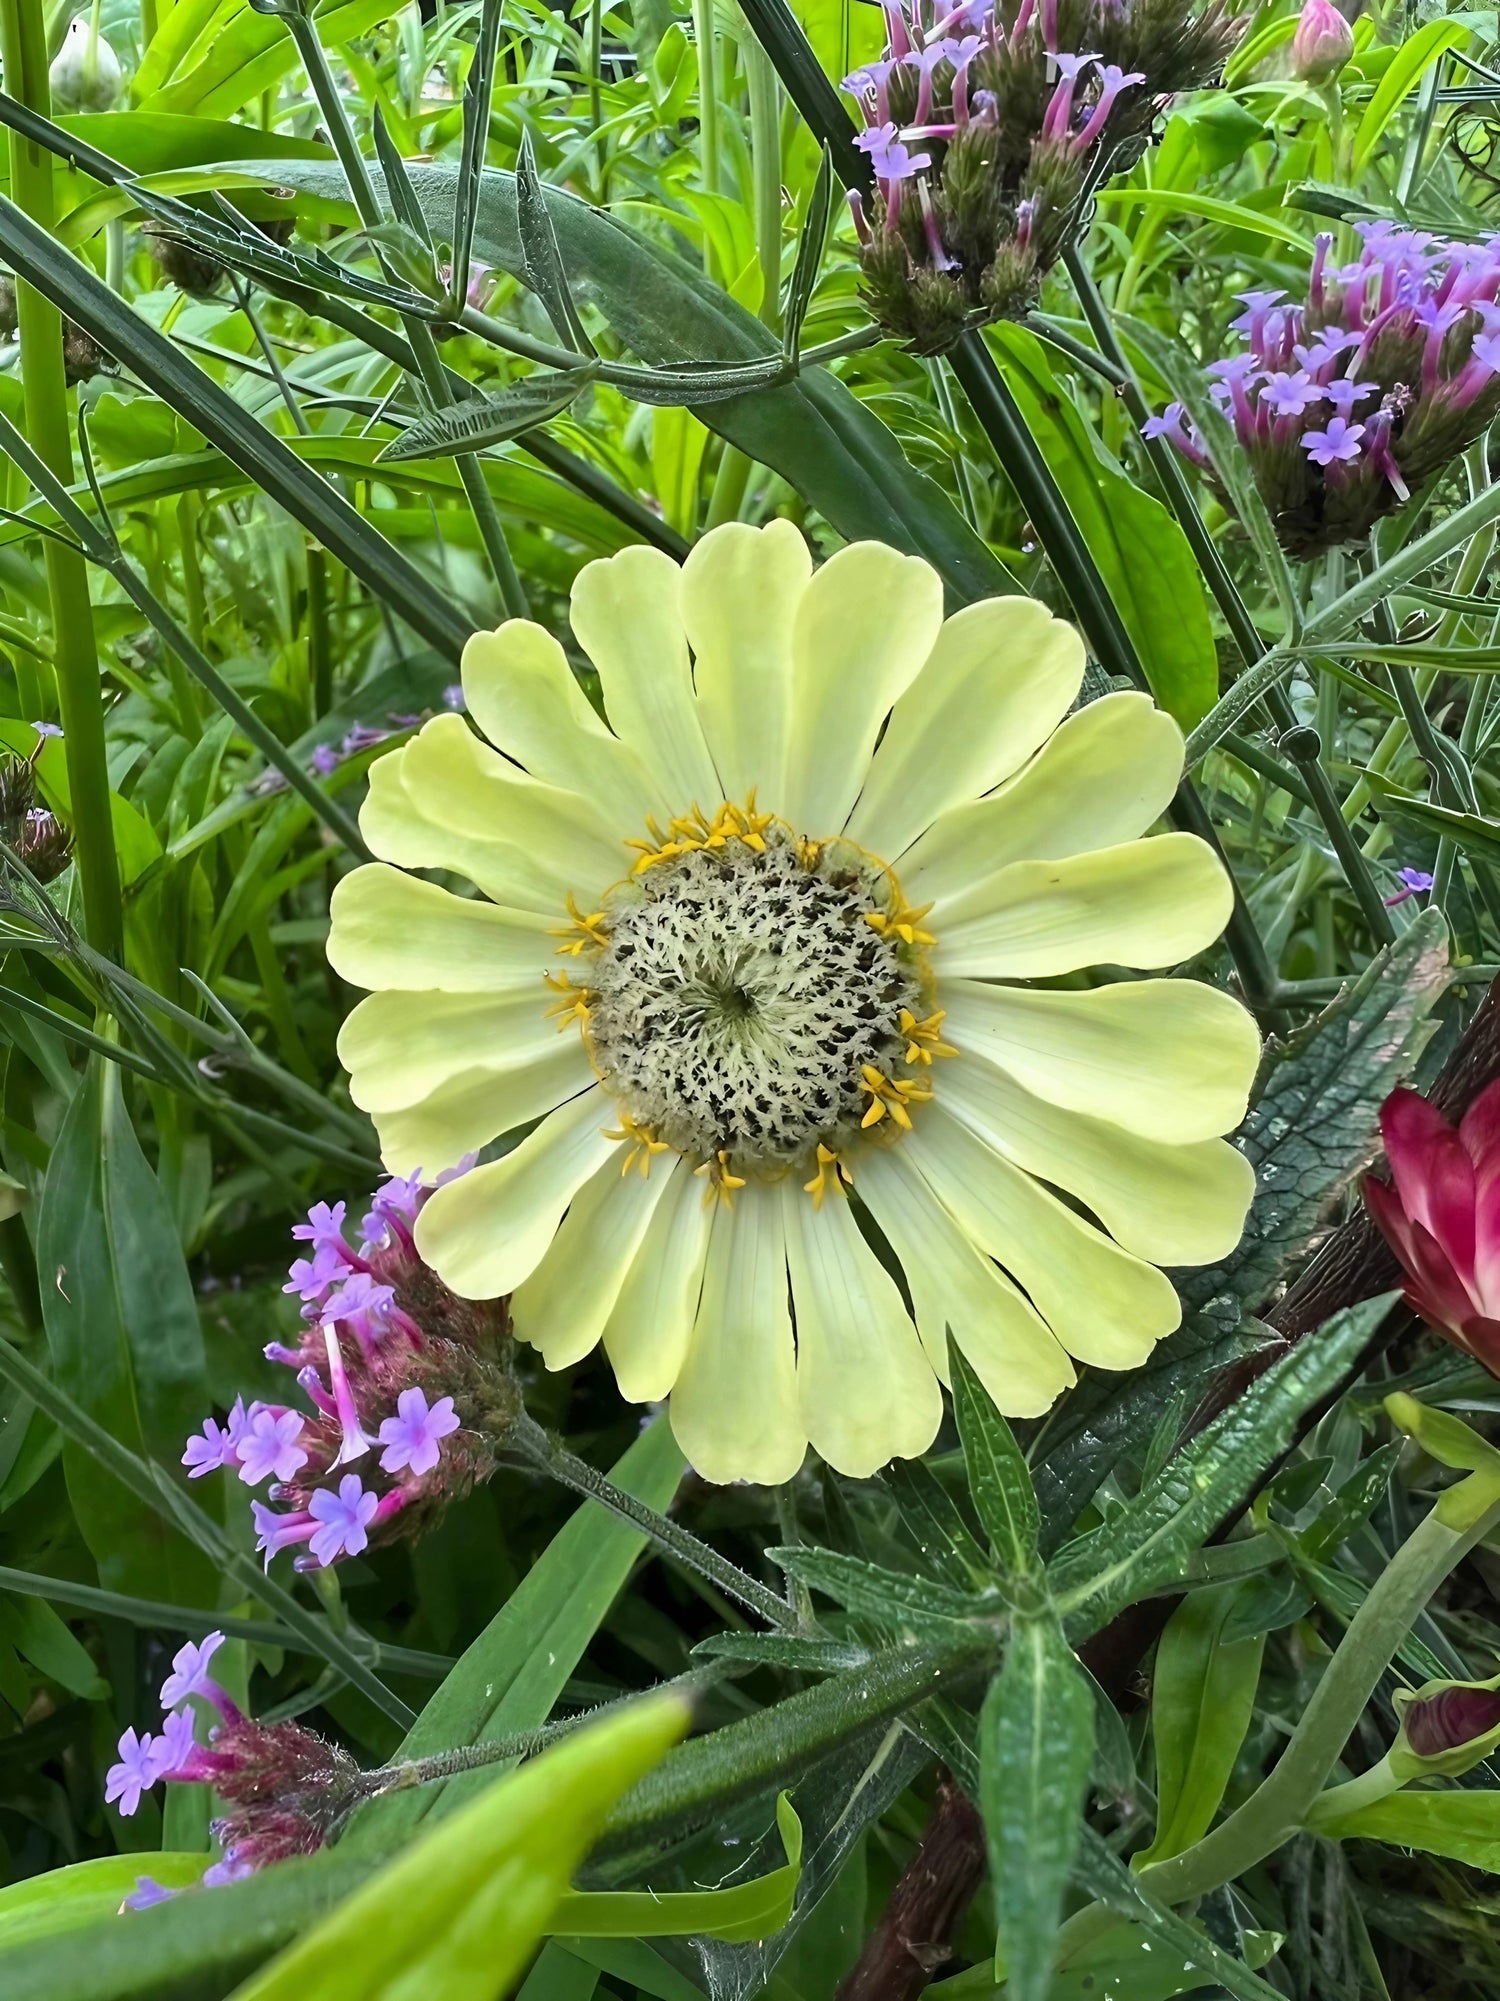 Vibrant Zinnia Green Envy flower with a prominent yellow center surrounded by purple flora